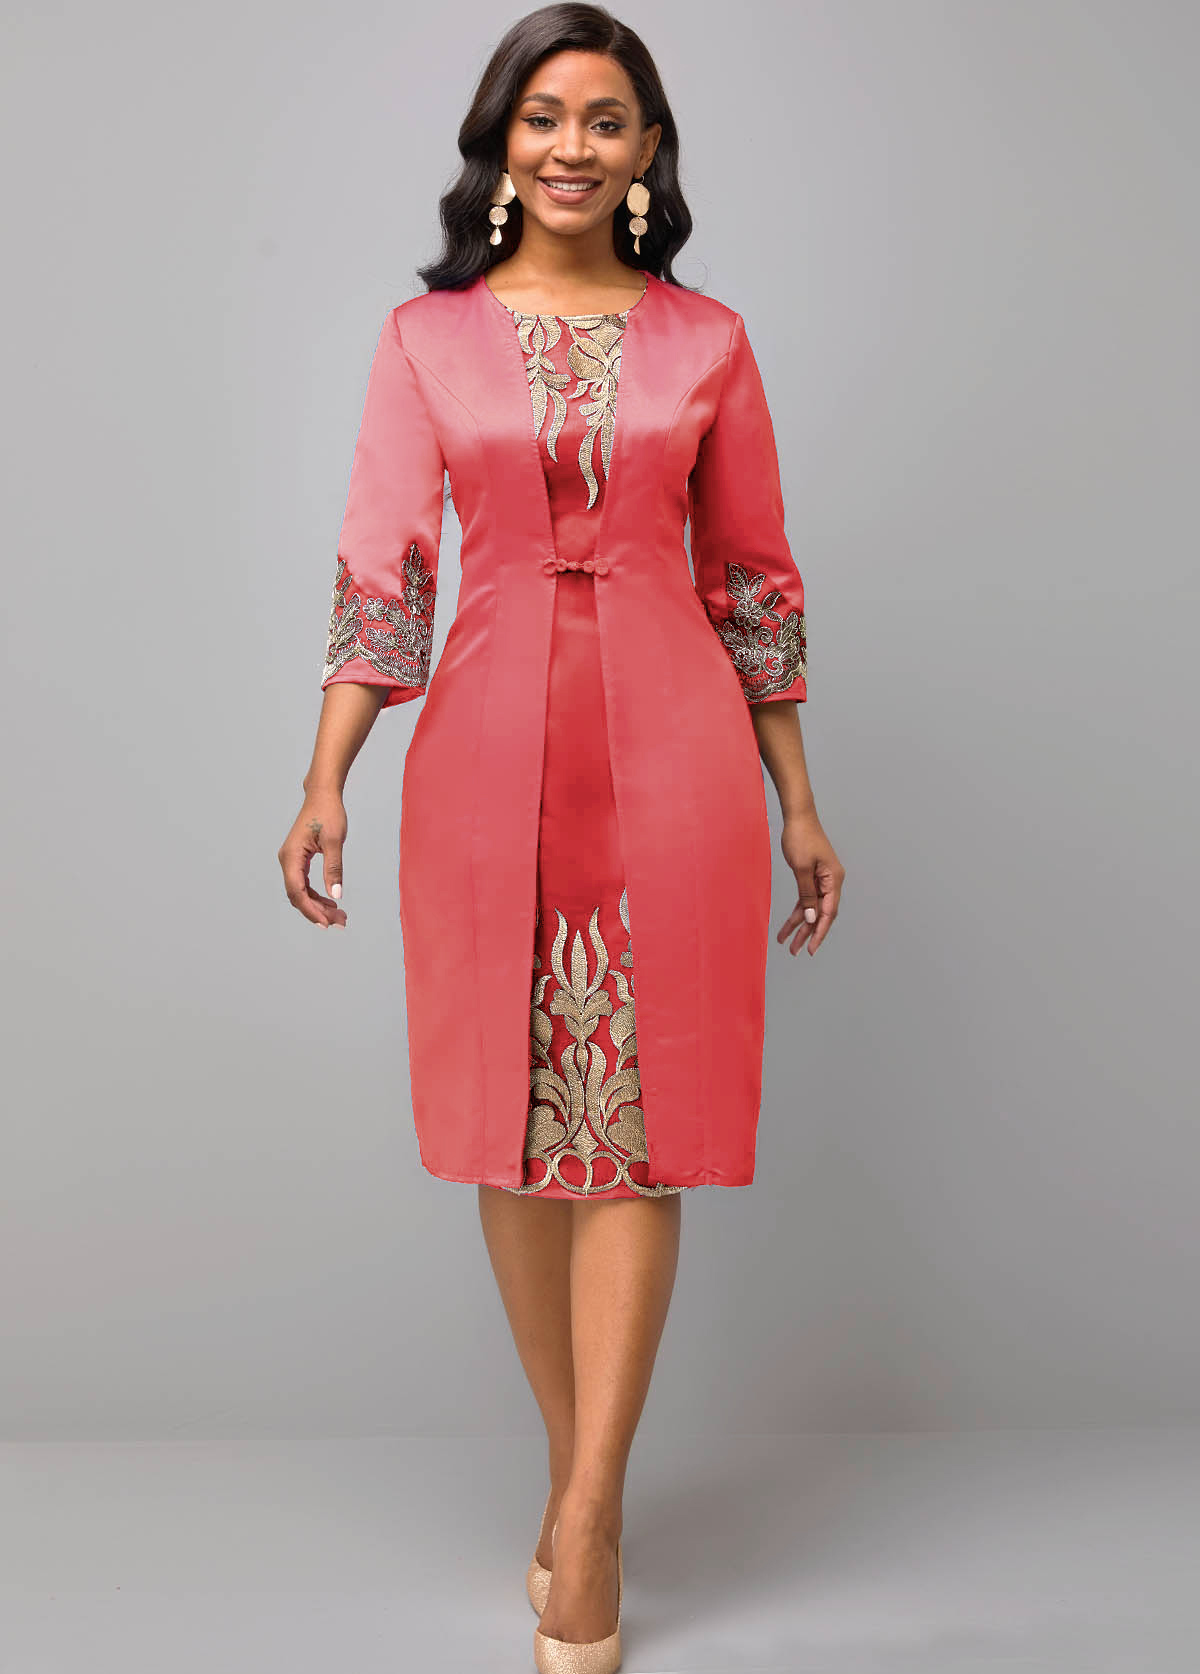 Lace Patchwork 3/4 Sleeve Round Neck Pink Dress